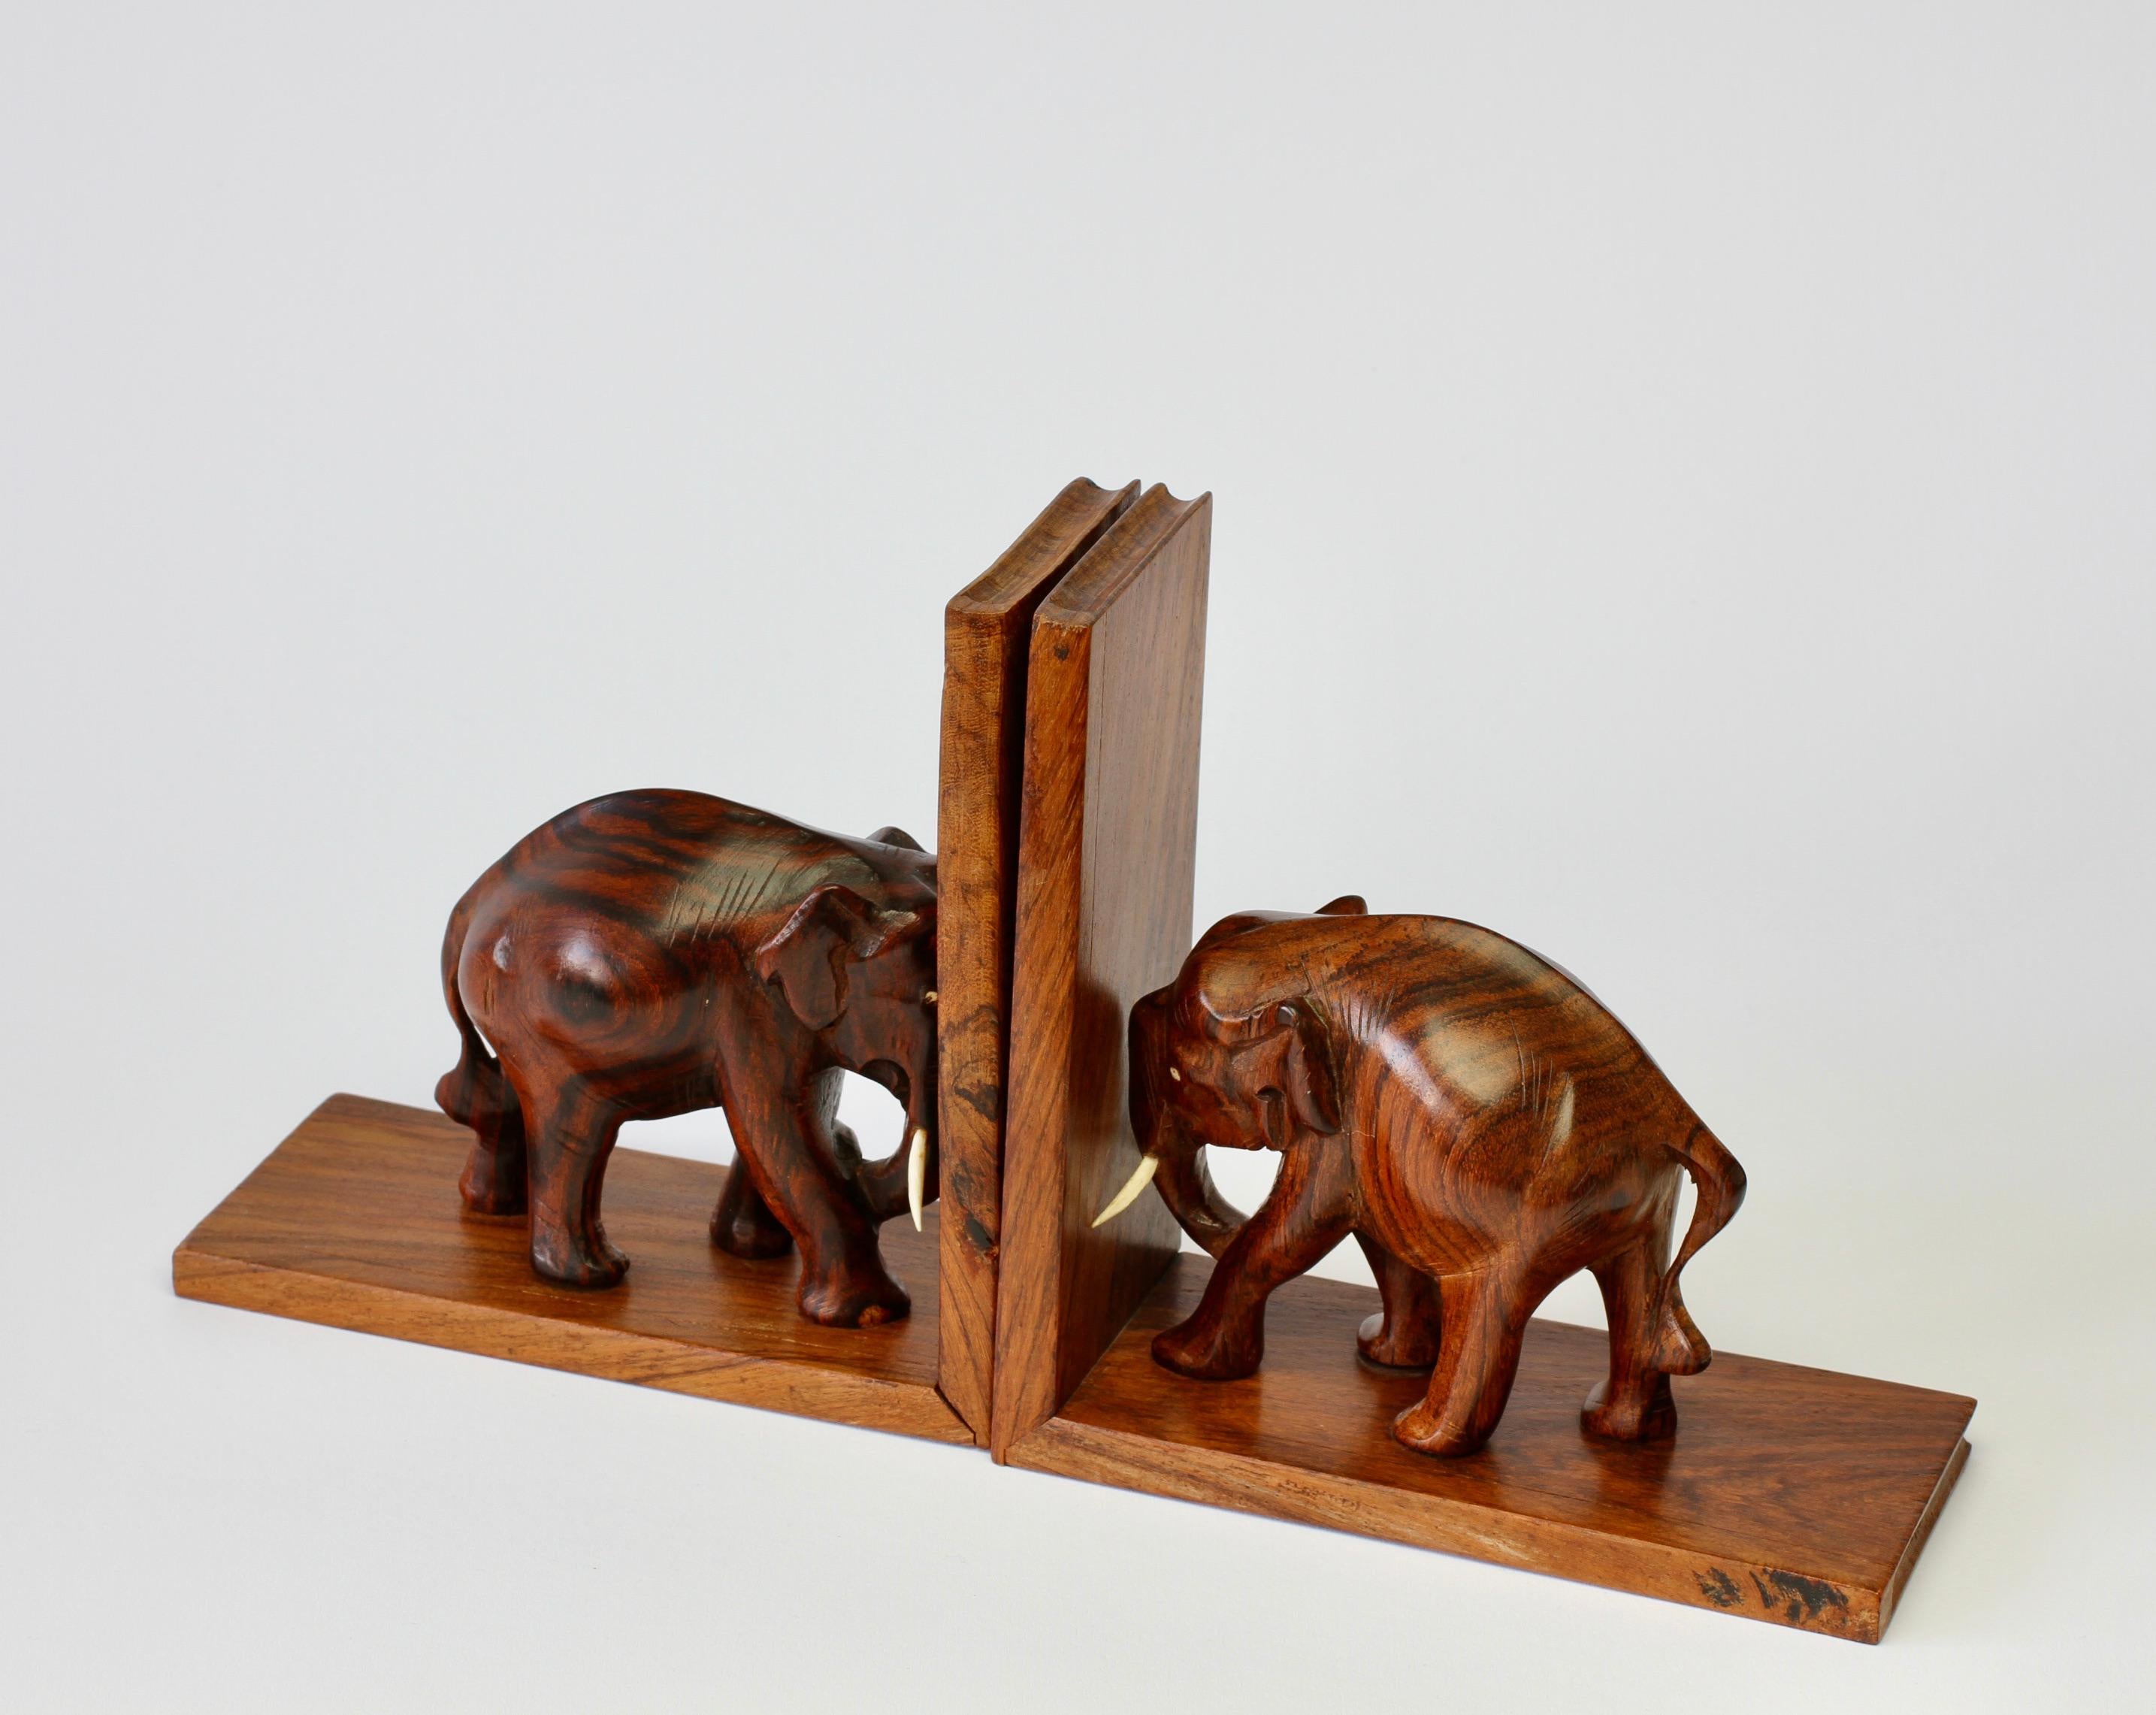 Hand-Carved Hand Carved Wooden Book Ends with Elephant Sculptures / Figures, circa 1960s